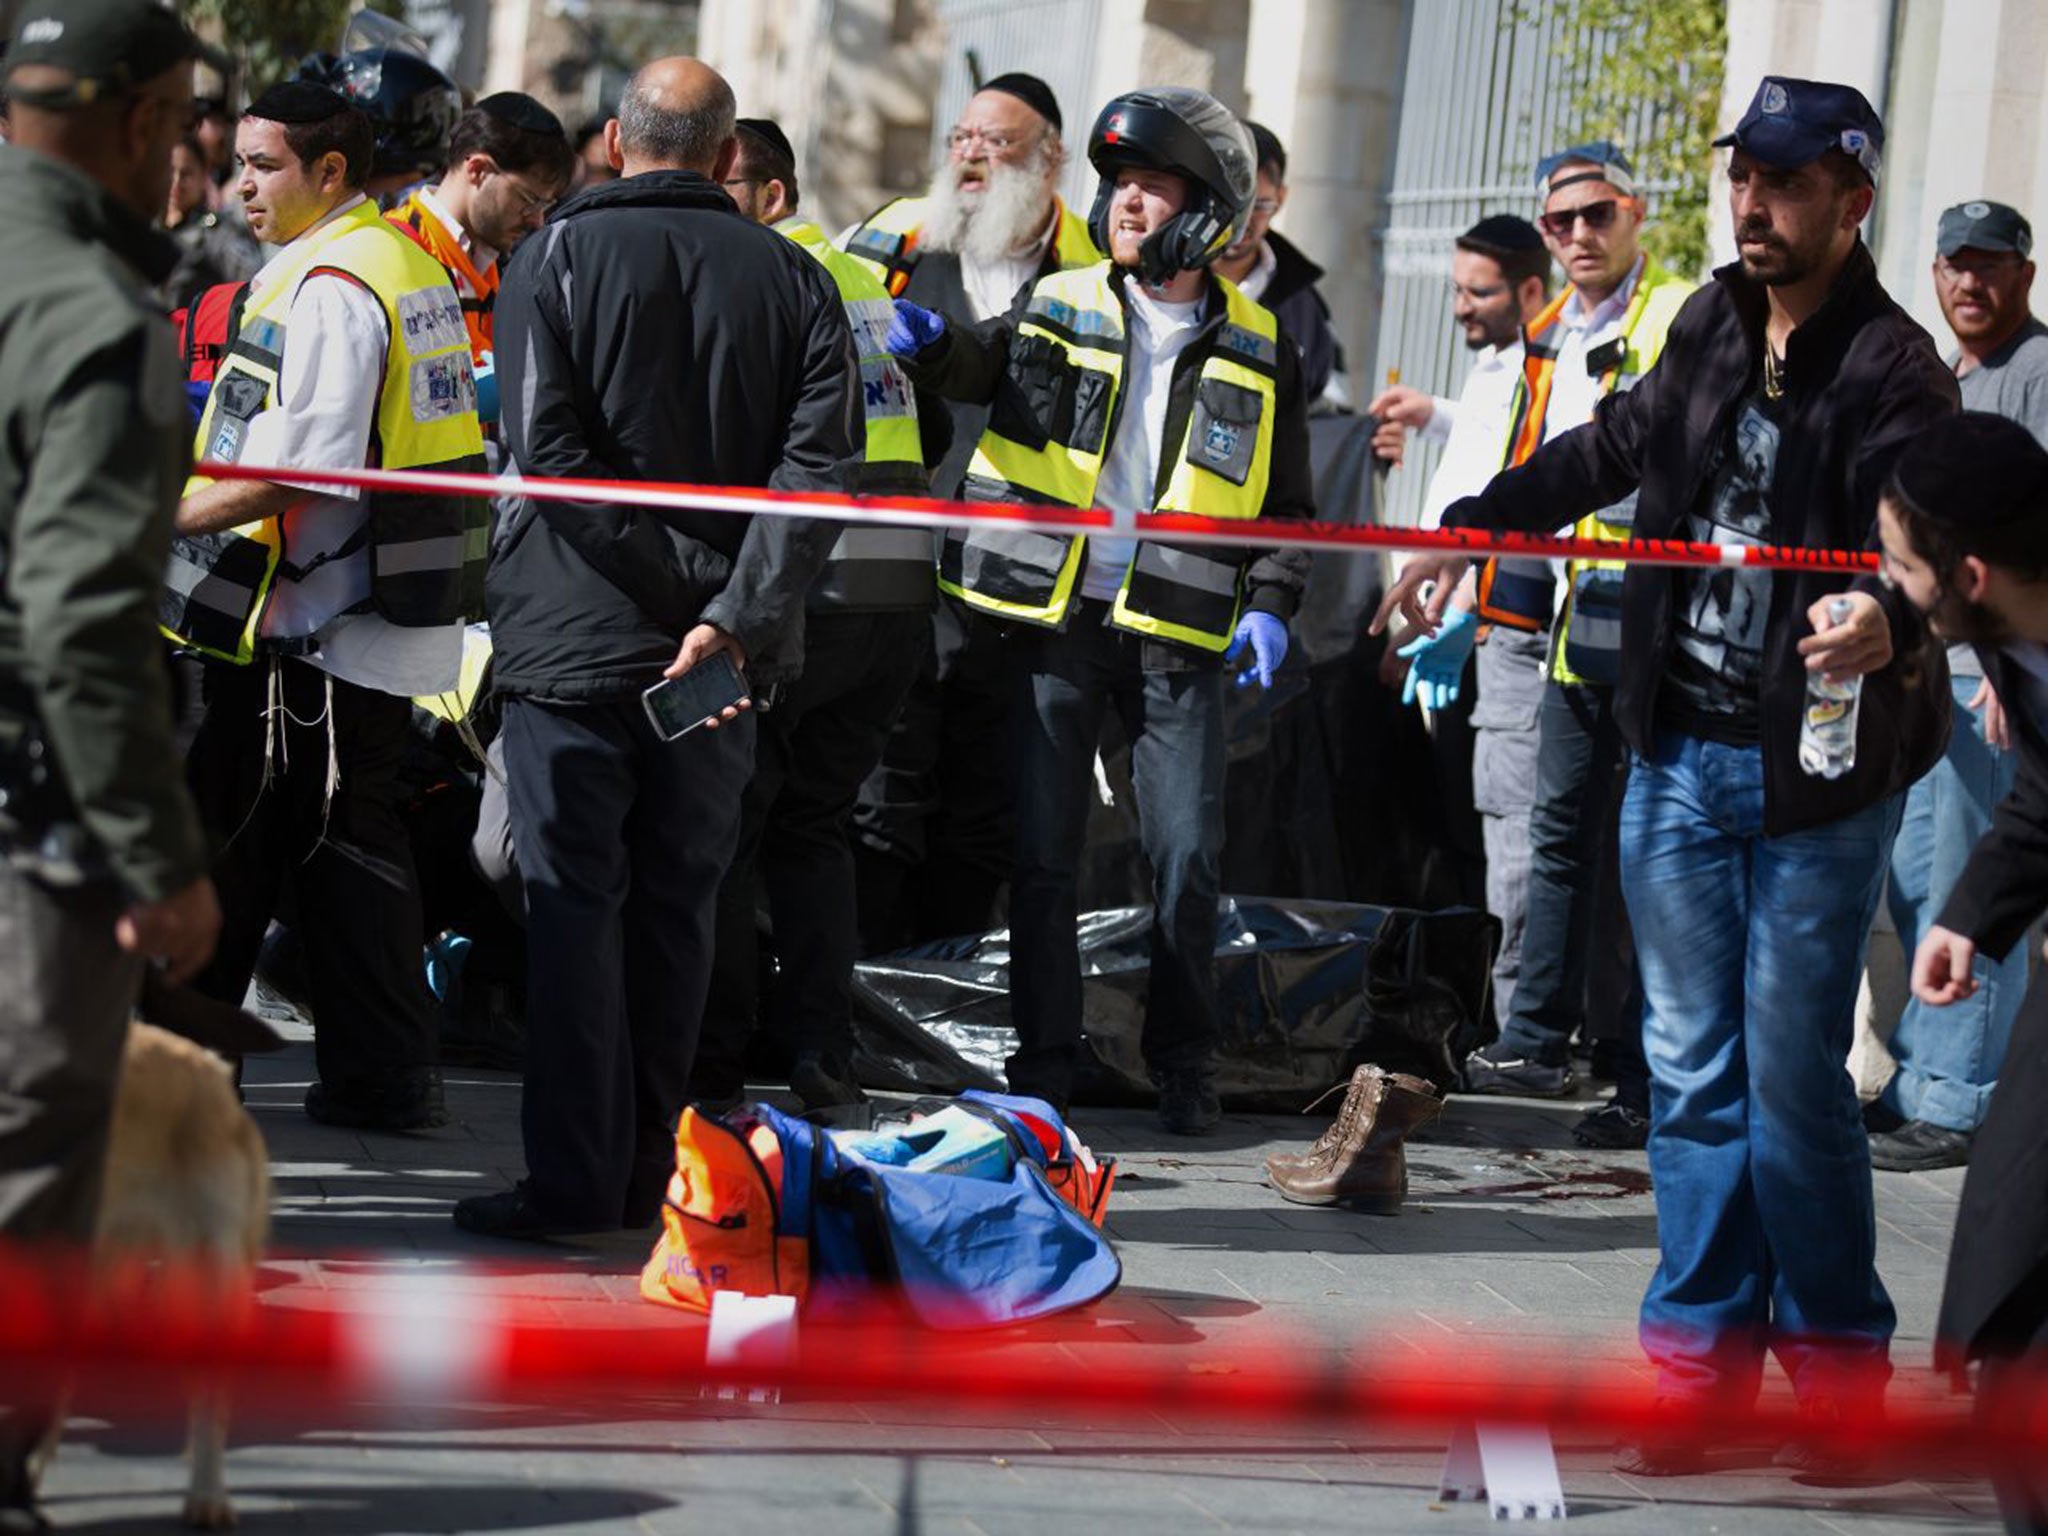 Security forces surround the body of a Palestinian girl who was shot dead while brandishing scissors in Jerusalem